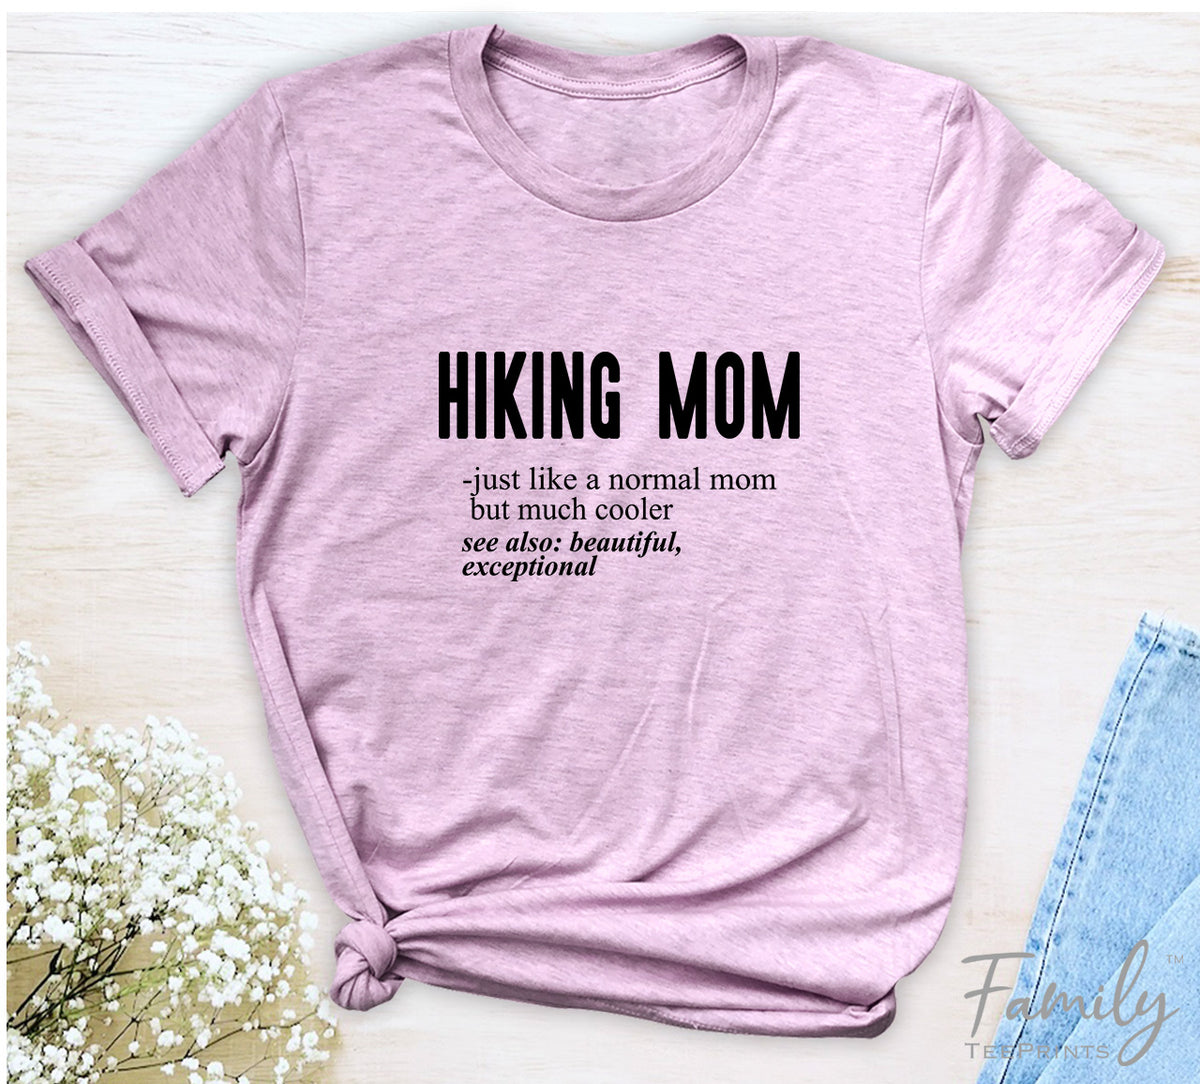 Hiking Mom Just Like A Normal Mom - Unisex T-shirt - Hiking Mom Shirt - Gift For Hiking Mom - familyteeprints